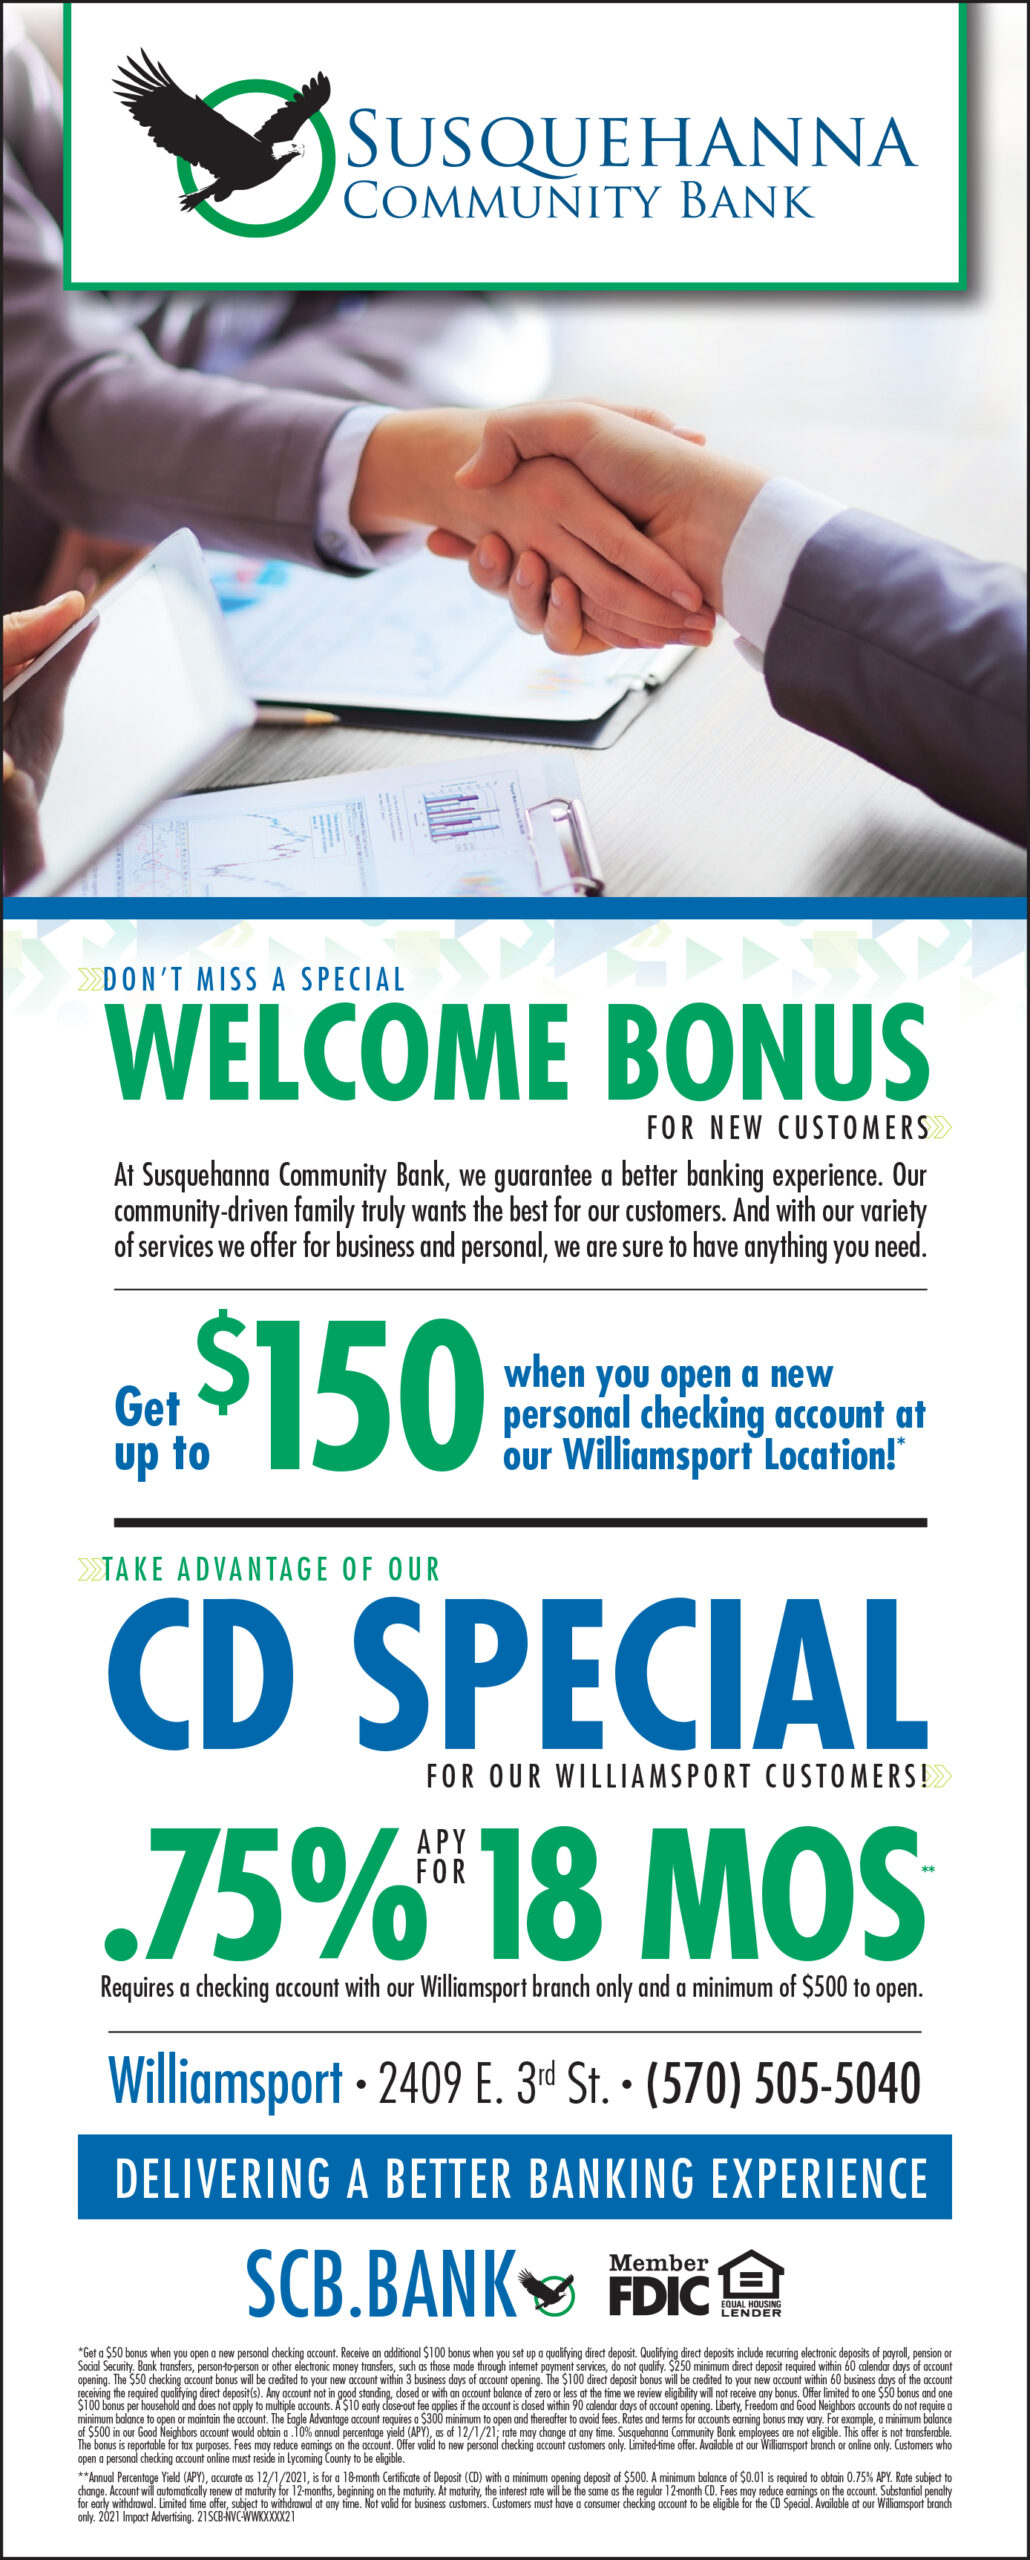 Get up to $150 welcome bonus & check out our 0.75% APY for 18 months CD Special